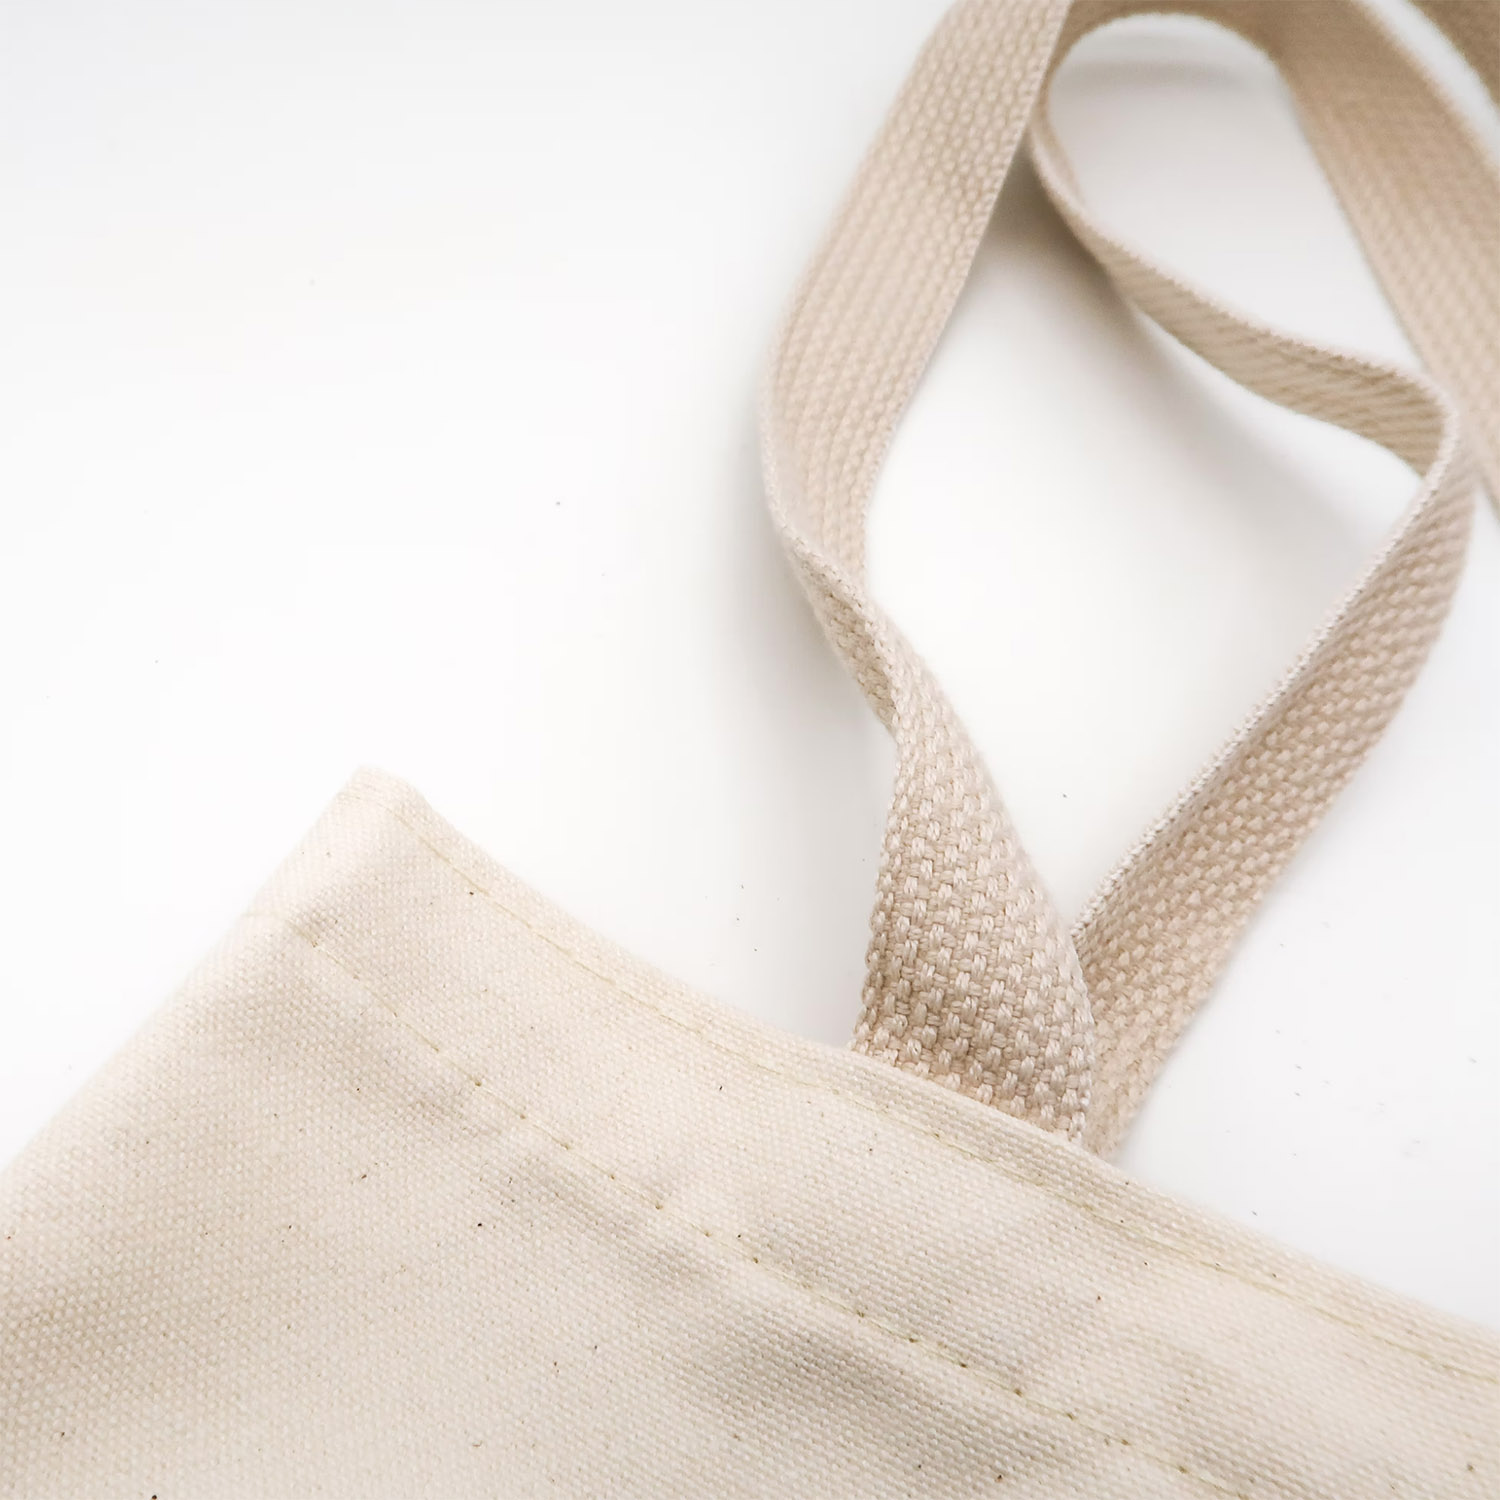 Close-up picture of Thai made cotton shopping bag handle